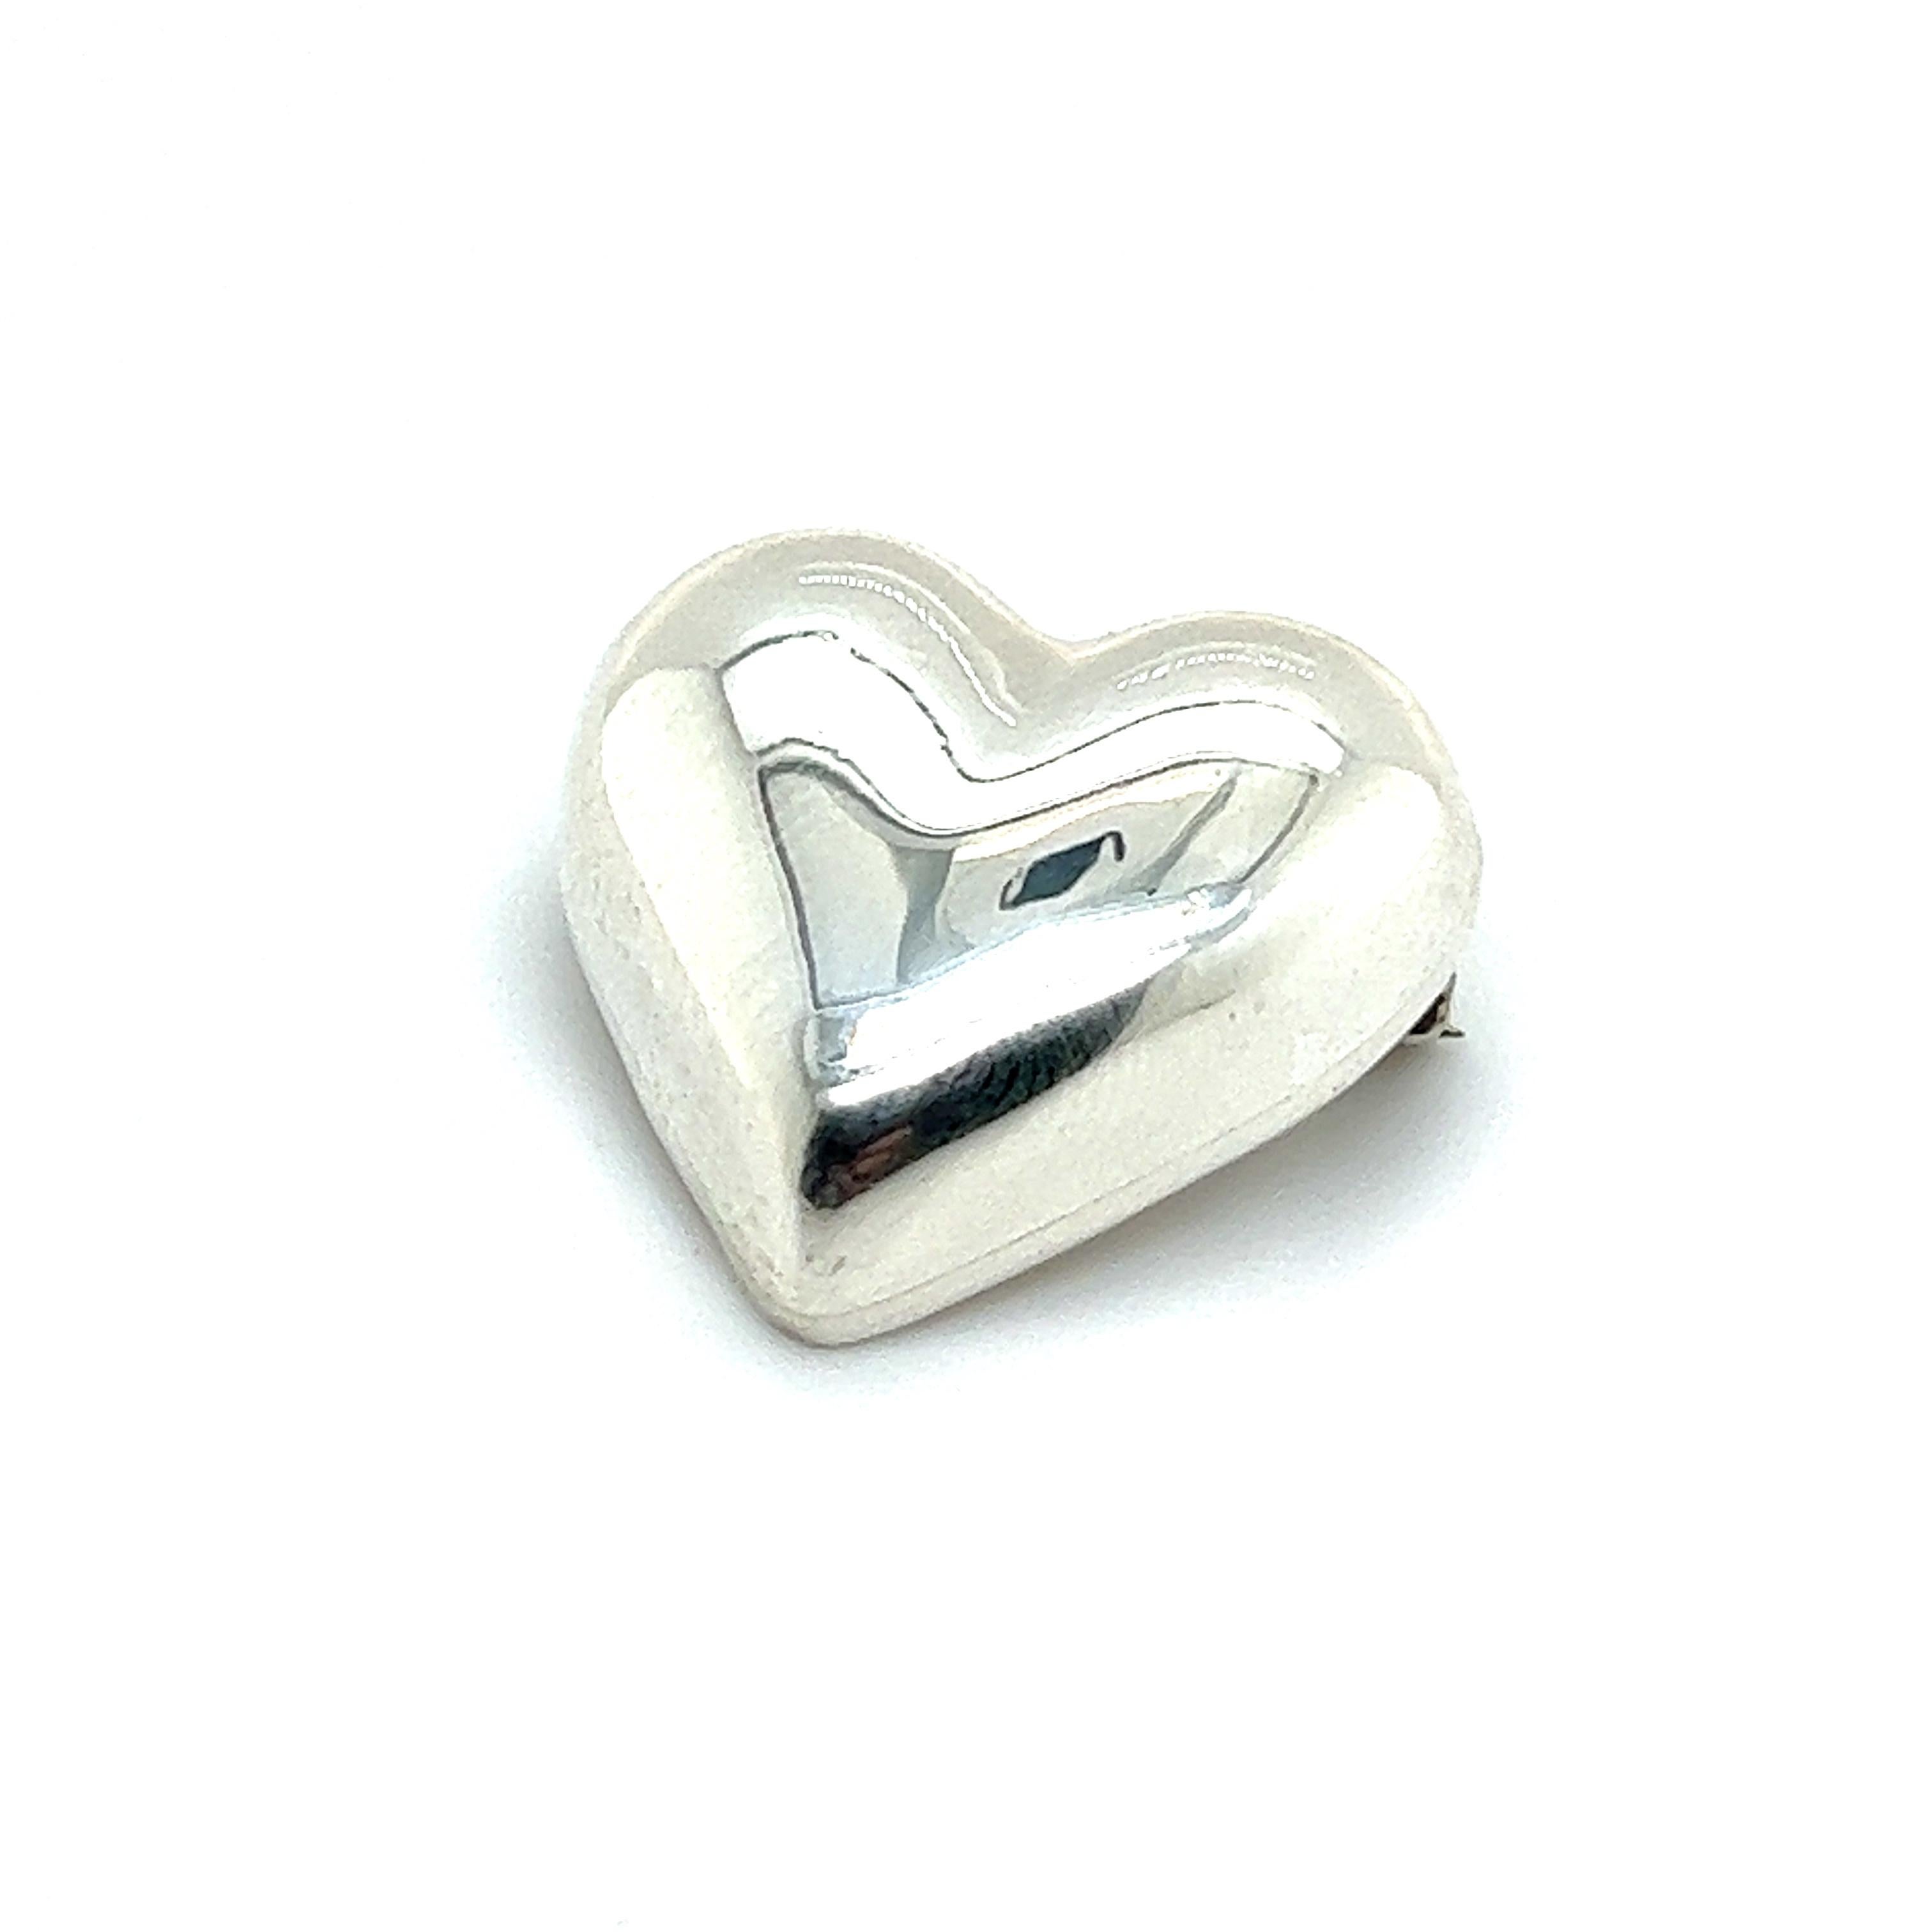 Authentic Tiffany & Co Estate Puffed Brooch Pin Sterling Silver TIF478

TRUSTED SELLER SINCE 2002

PLEASE SEE OUR HUNDREDS OF POSITIVE FEEDBACKS FROM OUR CLIENTS!!

FREE SHIPPING
Grams: 10.50
Shape: Puffed Heart
Material: Sterling Silver

We try to